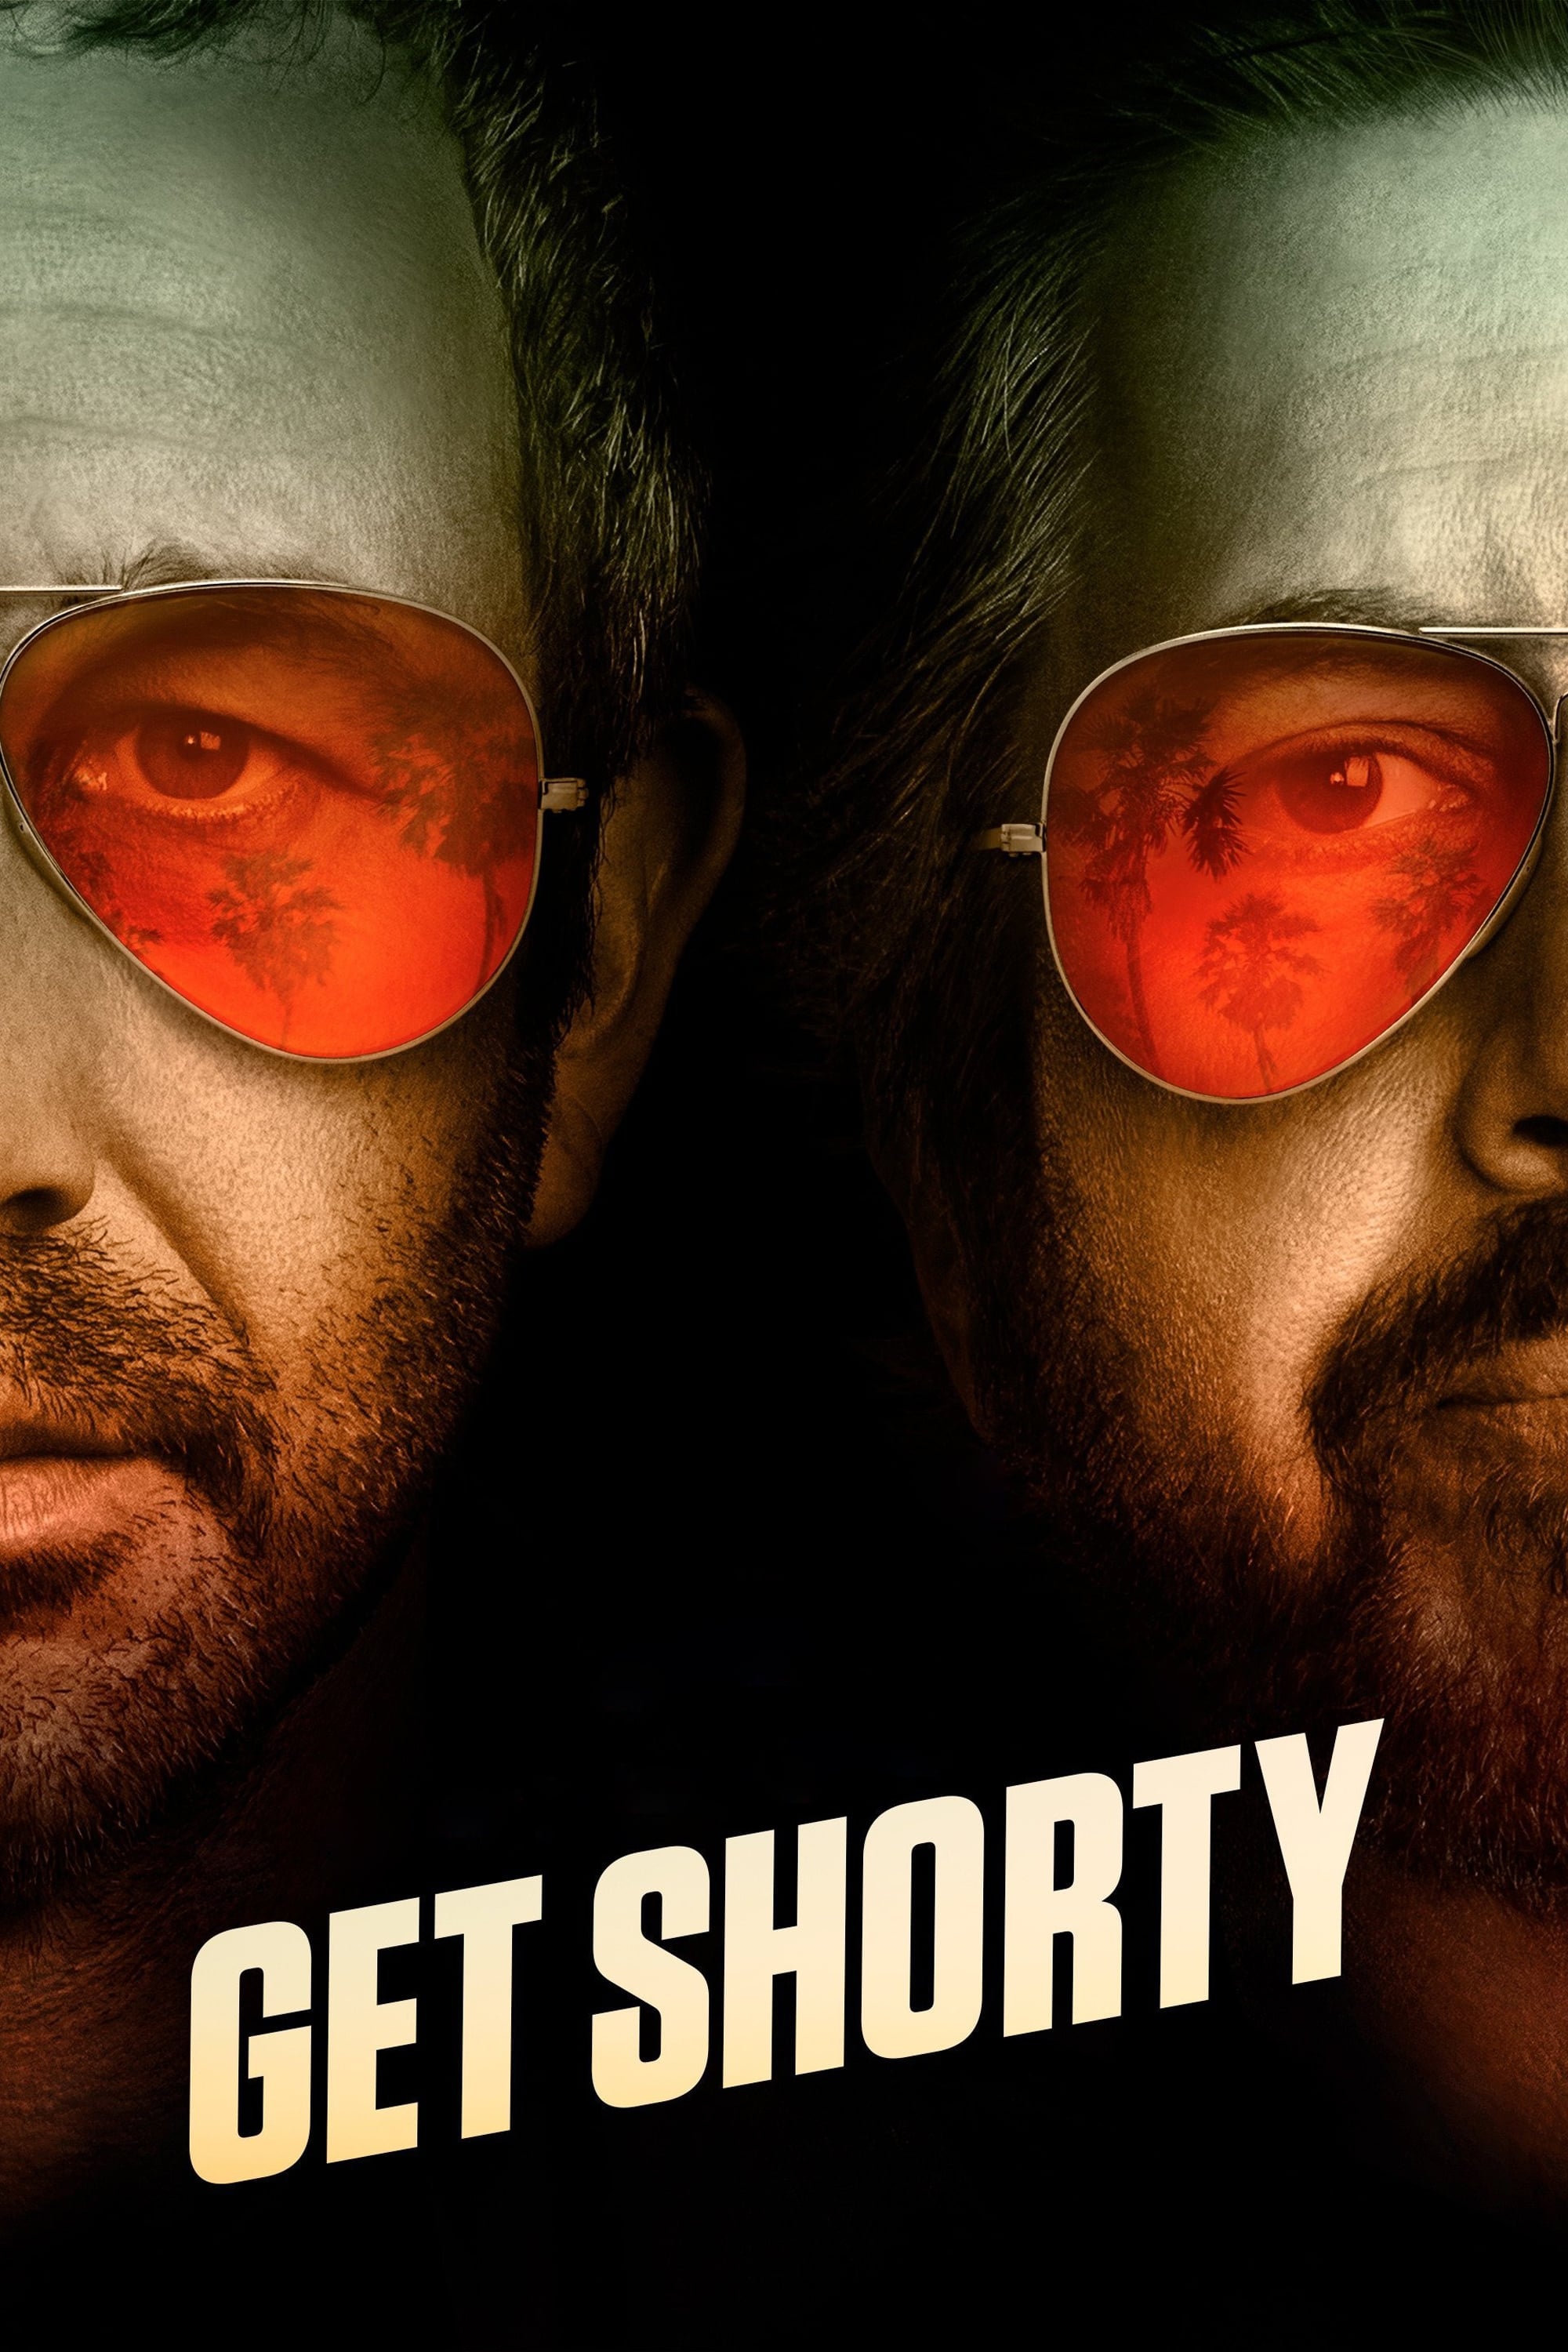 Get Shorty TV Shows About Money Laundering